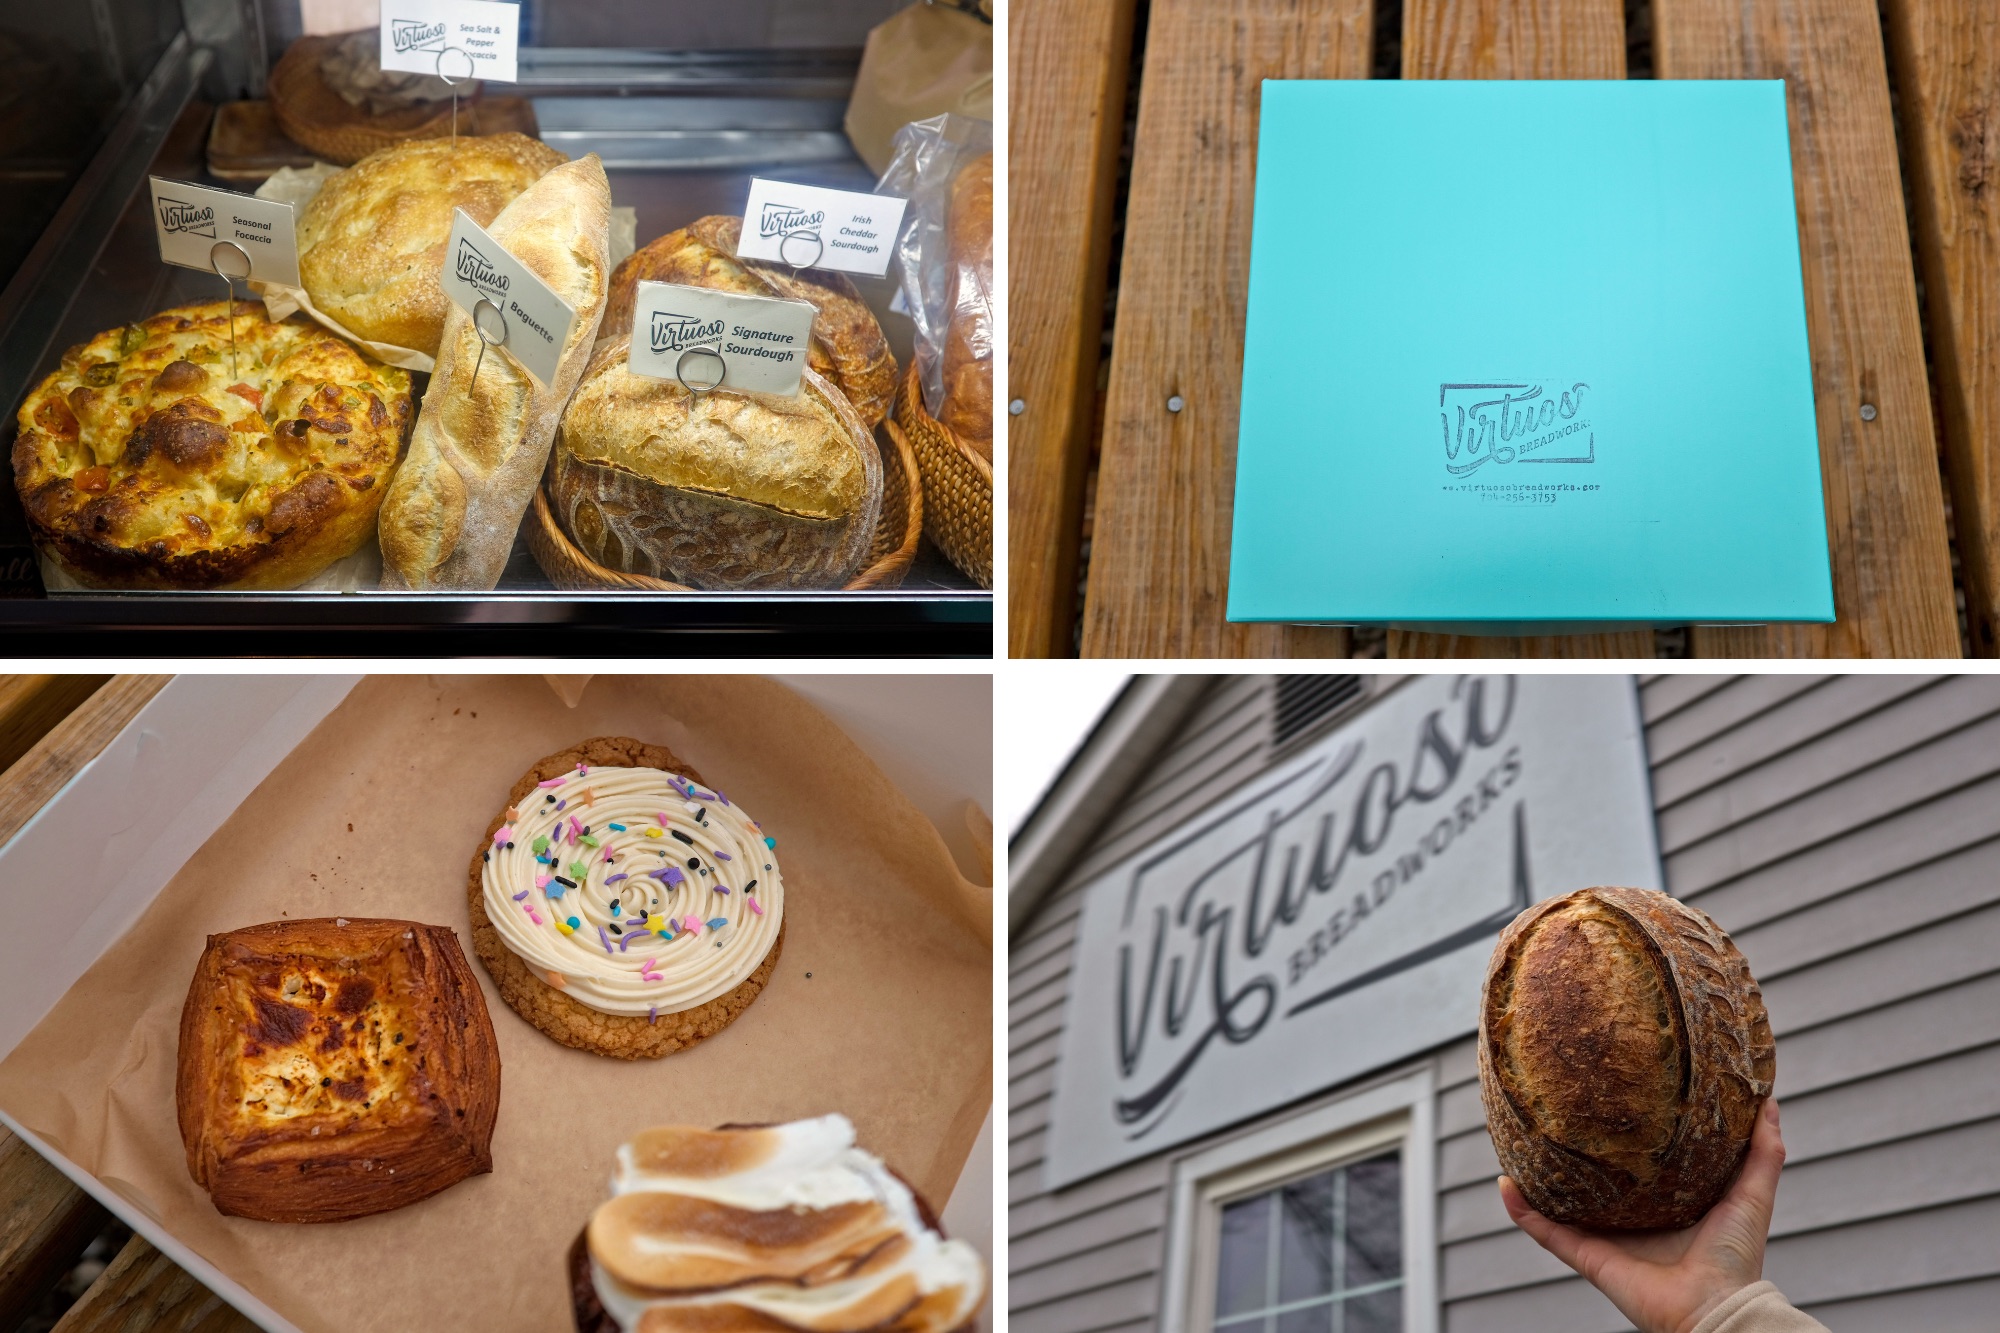 Four images of the pastries and bread on offer at Virtuoso